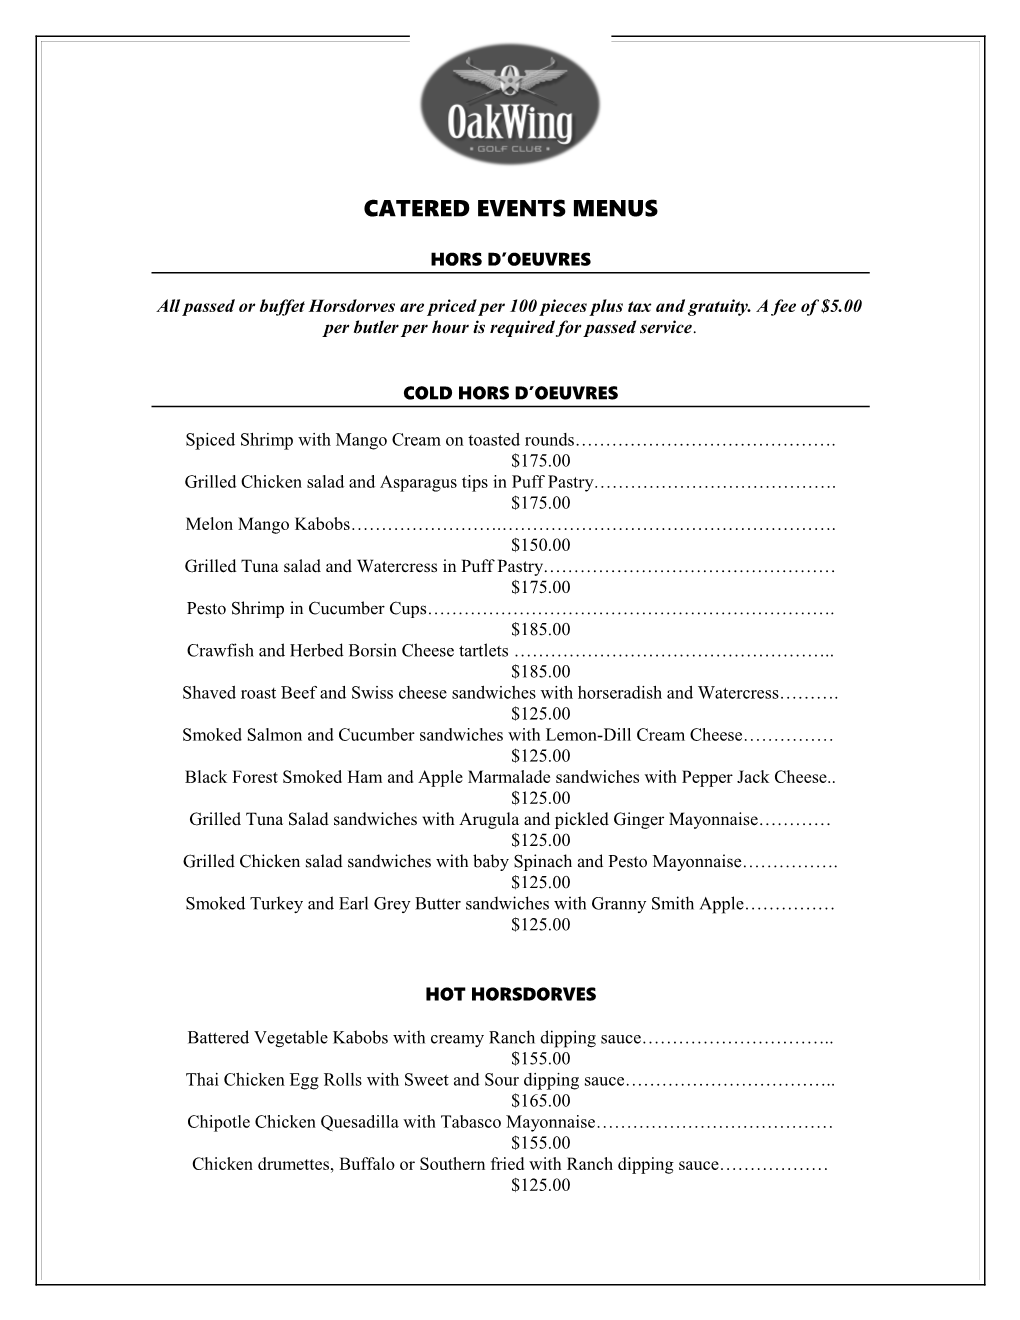 Catered Events Menus